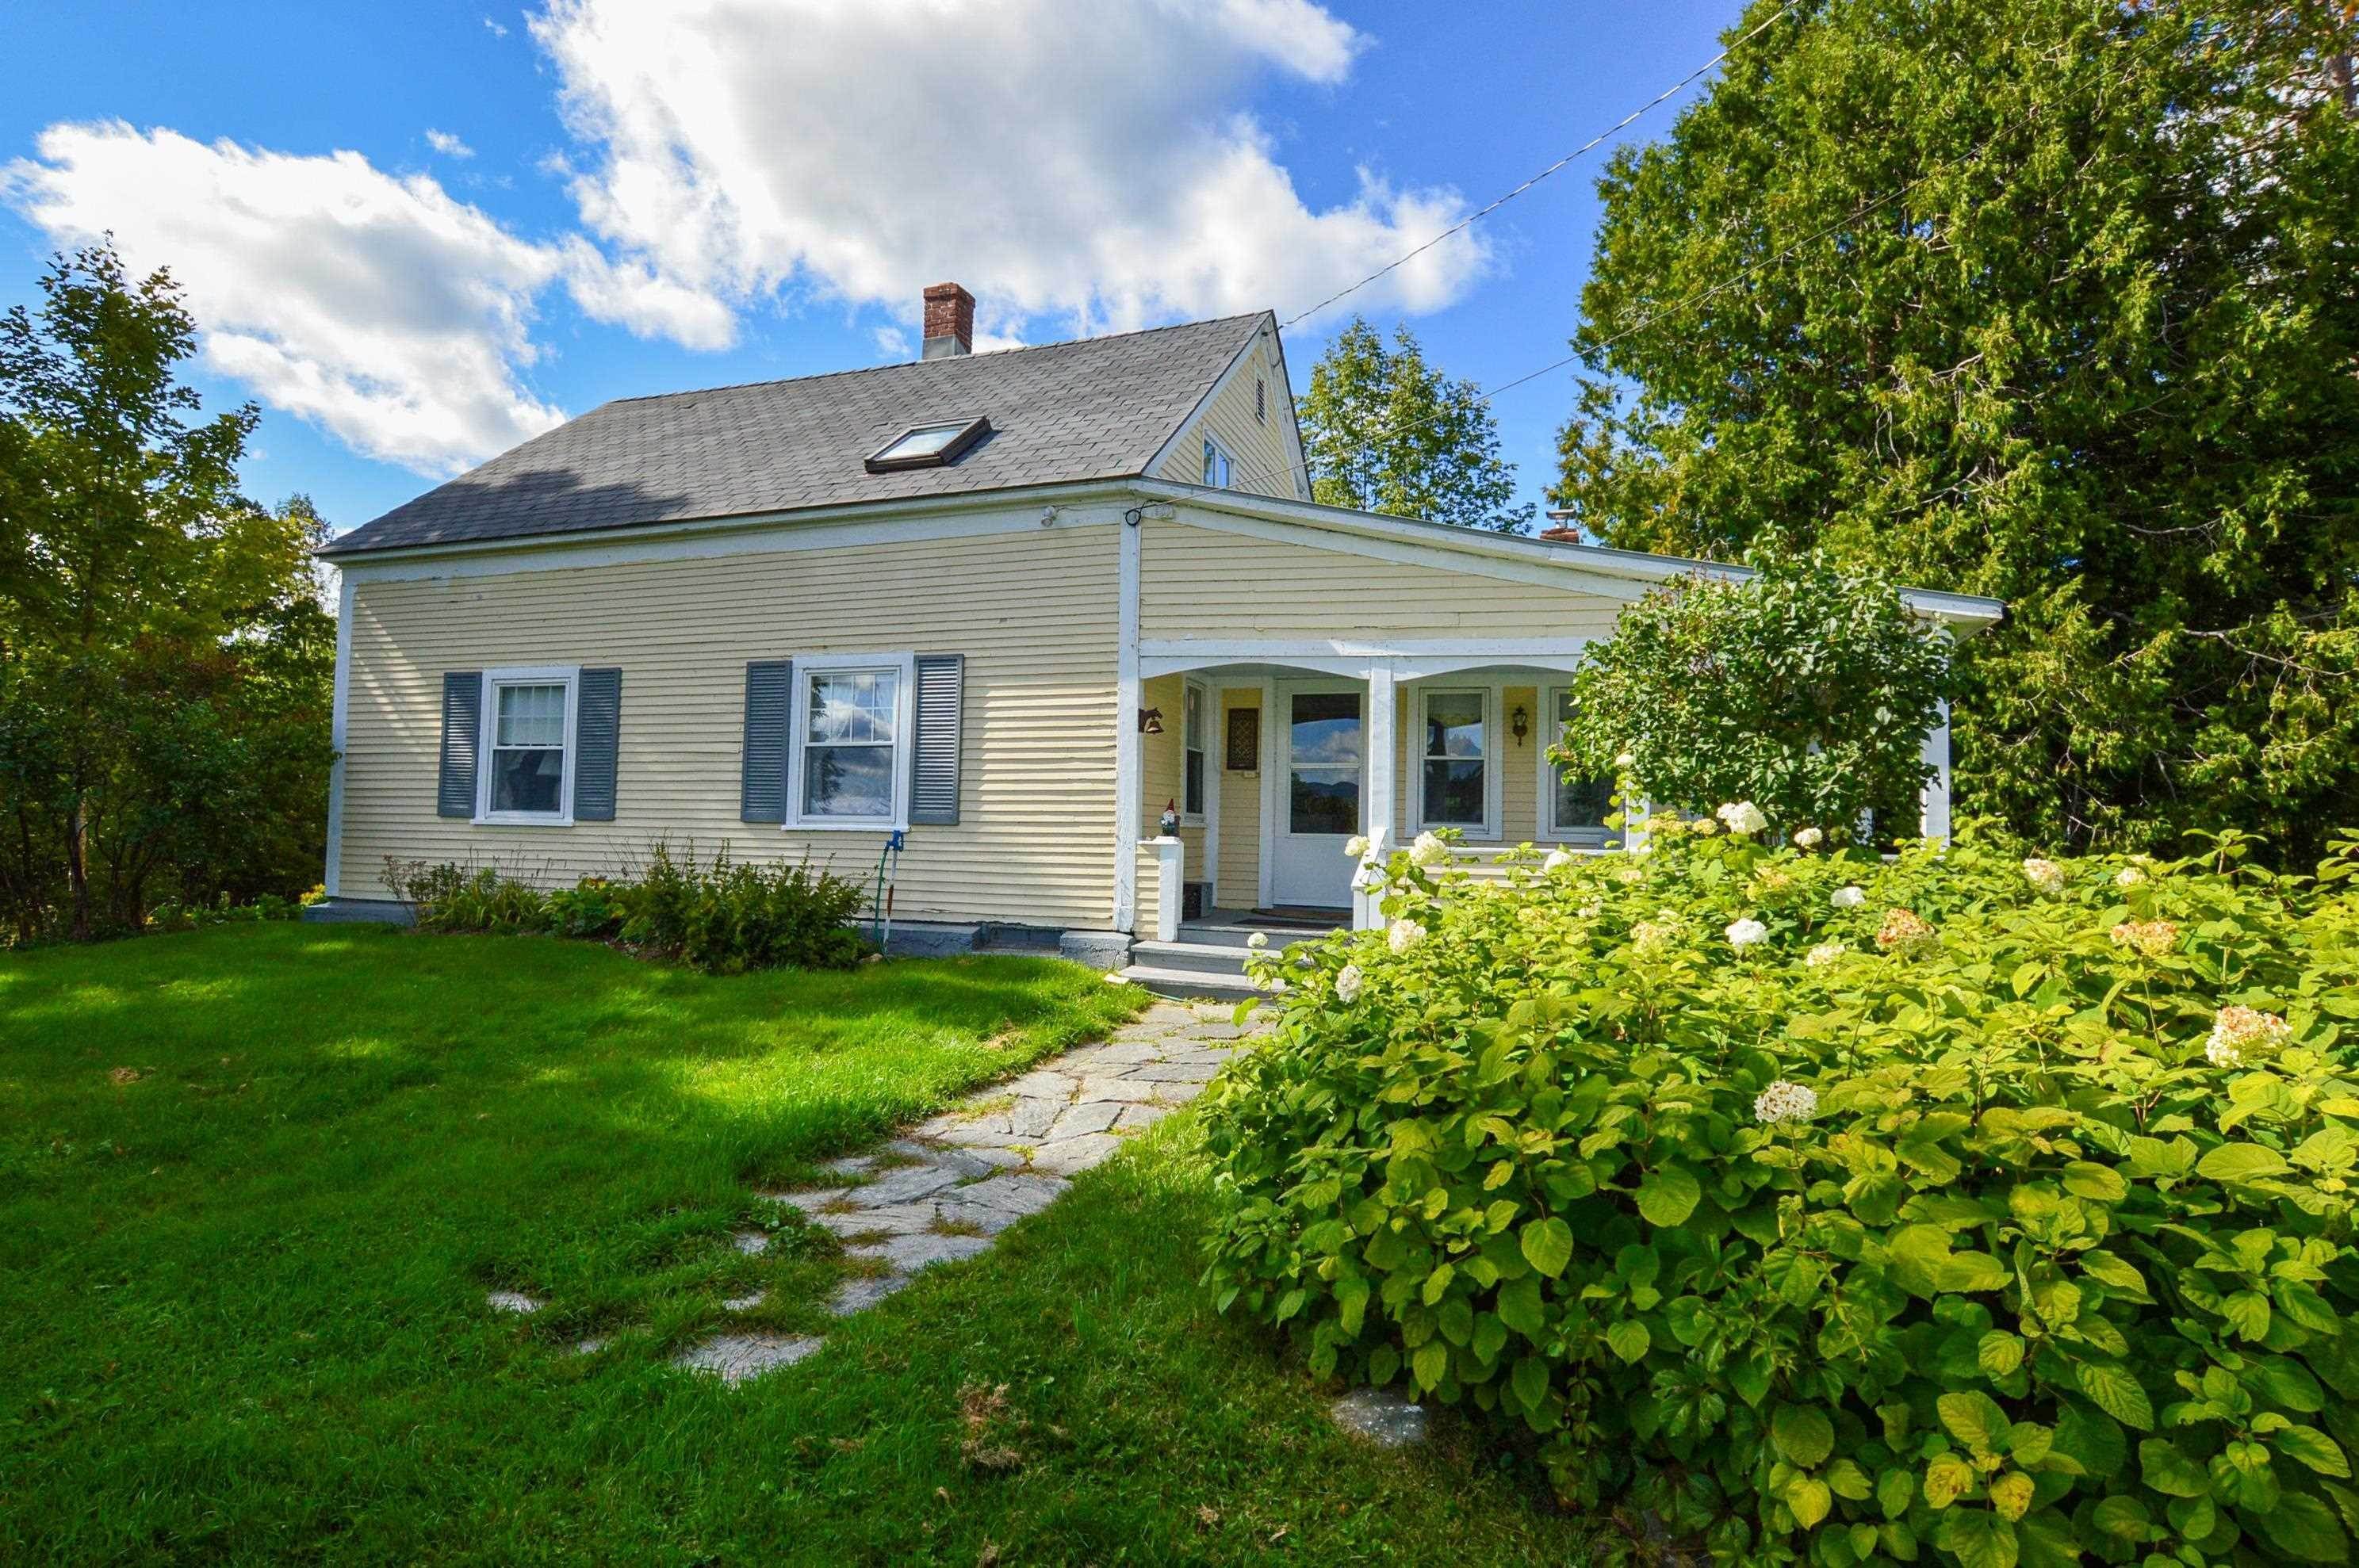 Single Family Homes at Mount Holly, VT 05758